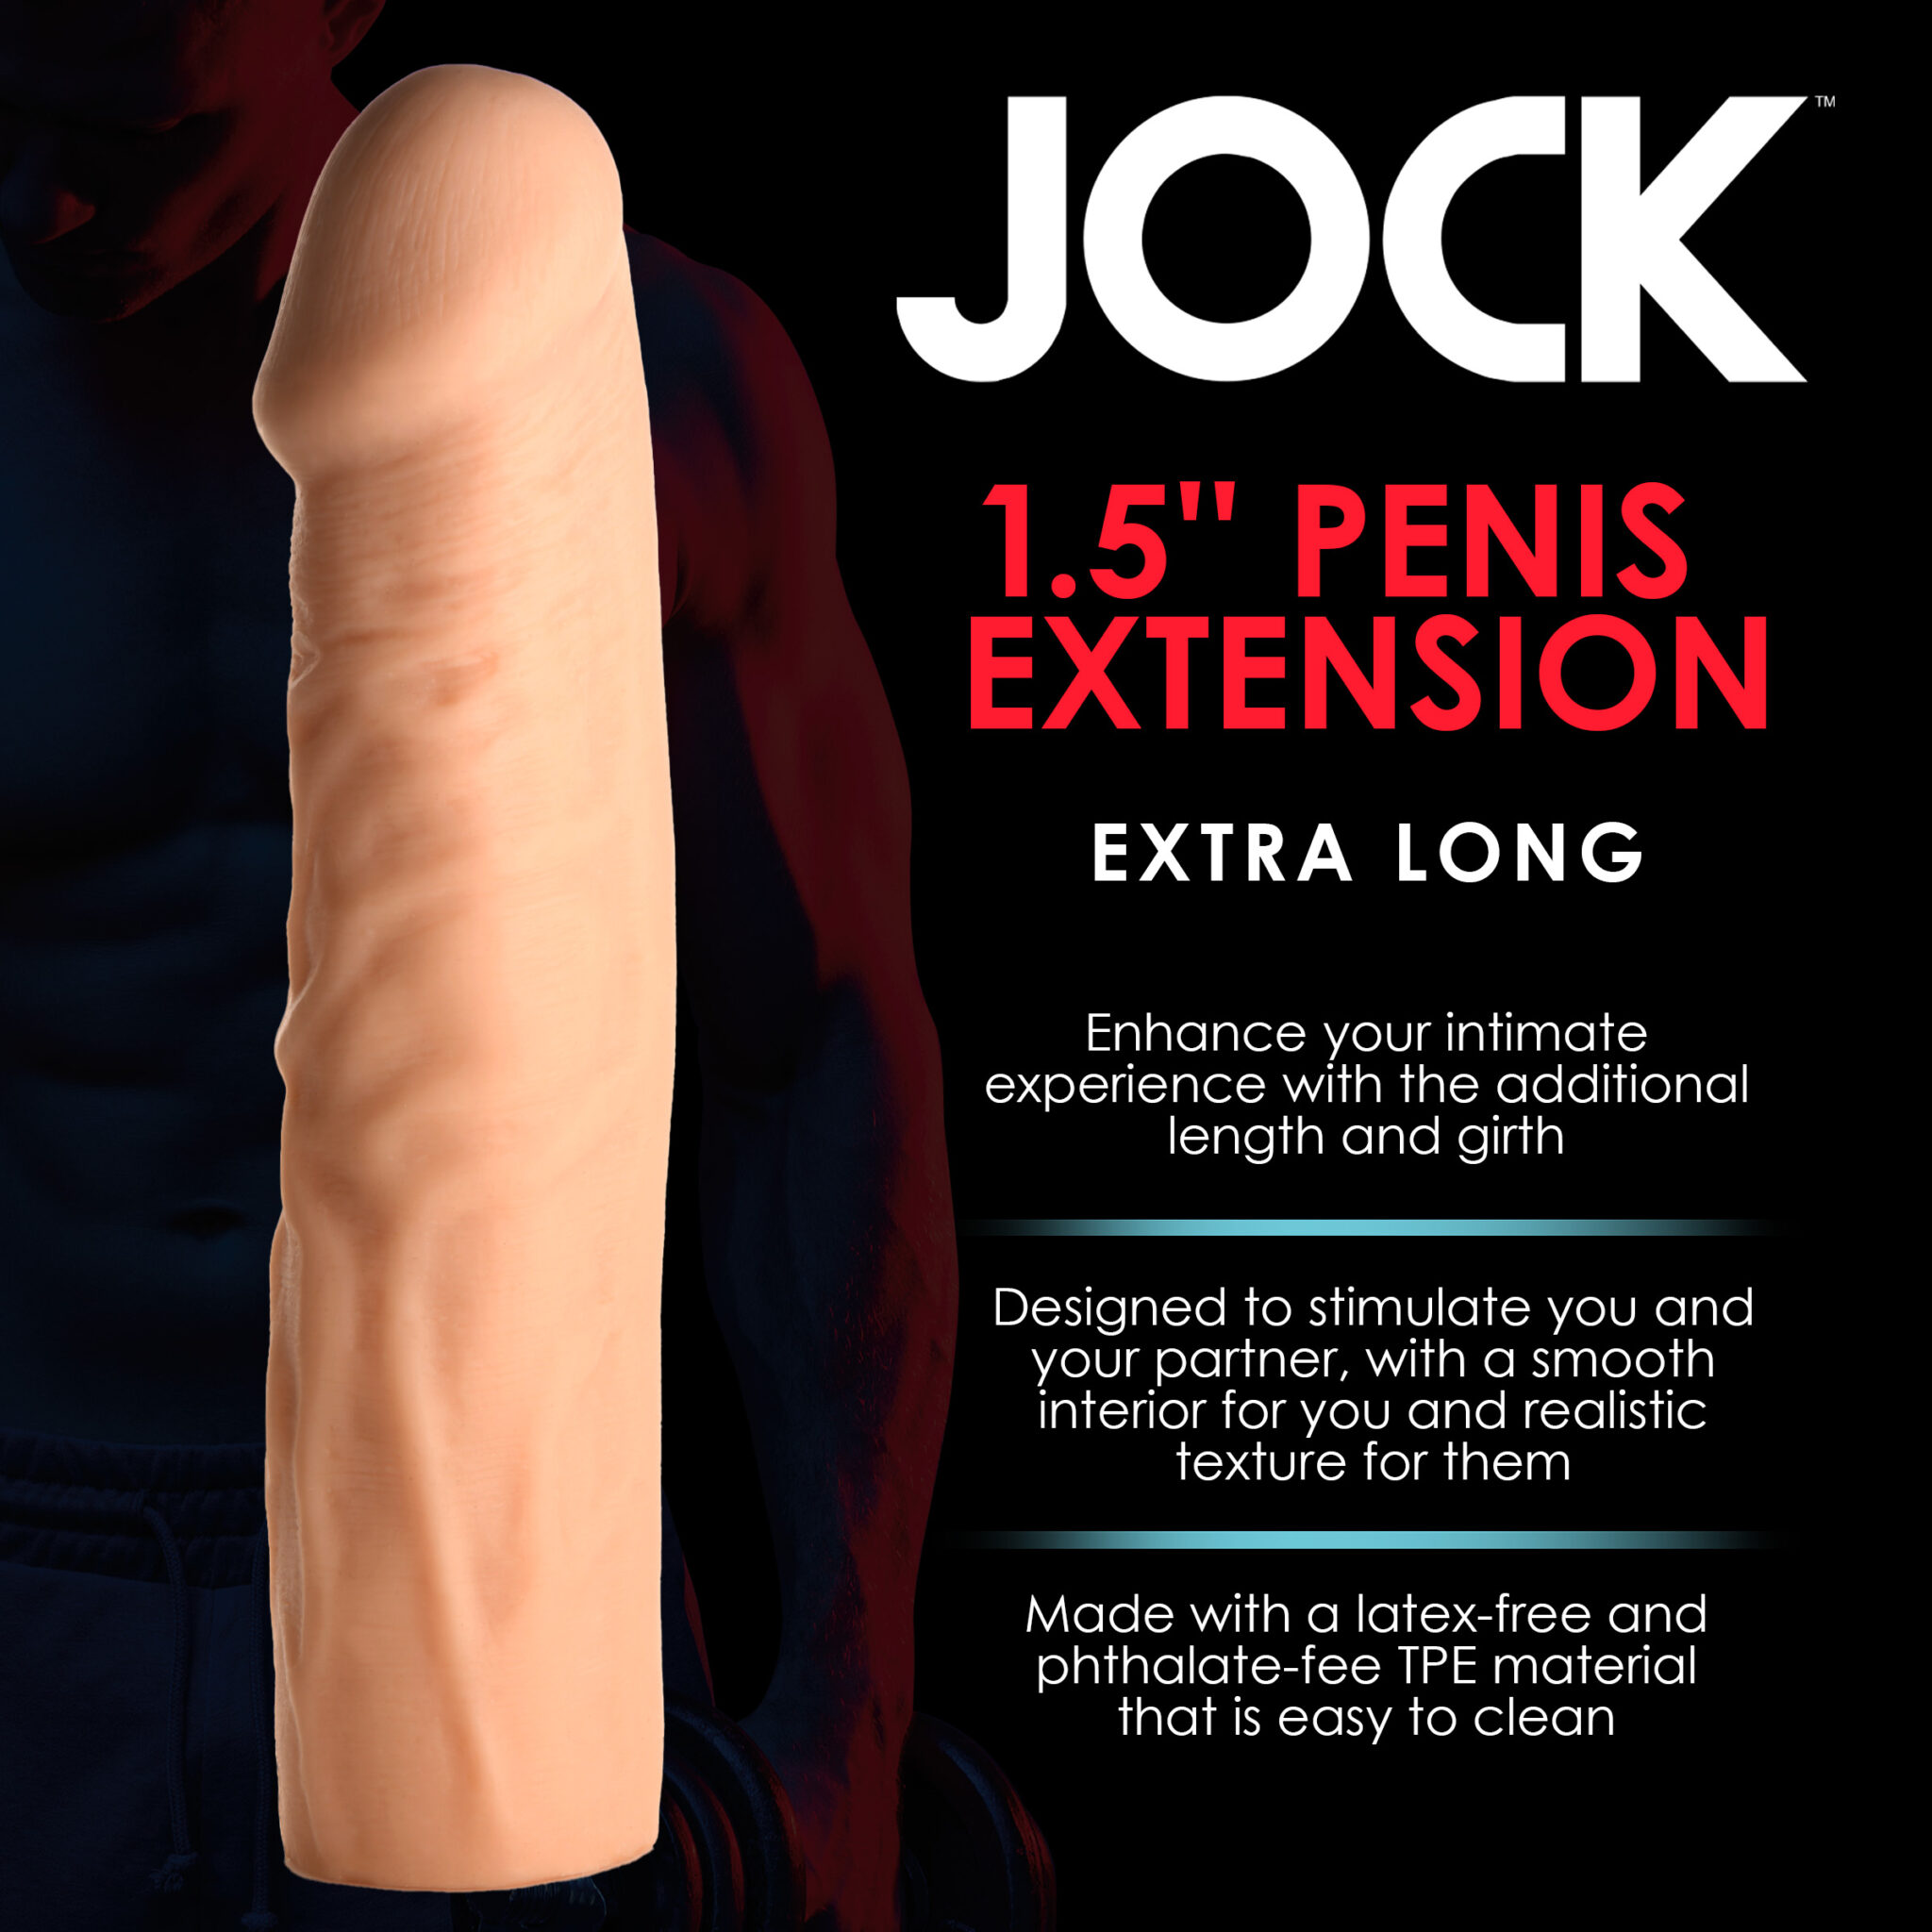 Extra Long 1.5 Inch Penis Extension – Light